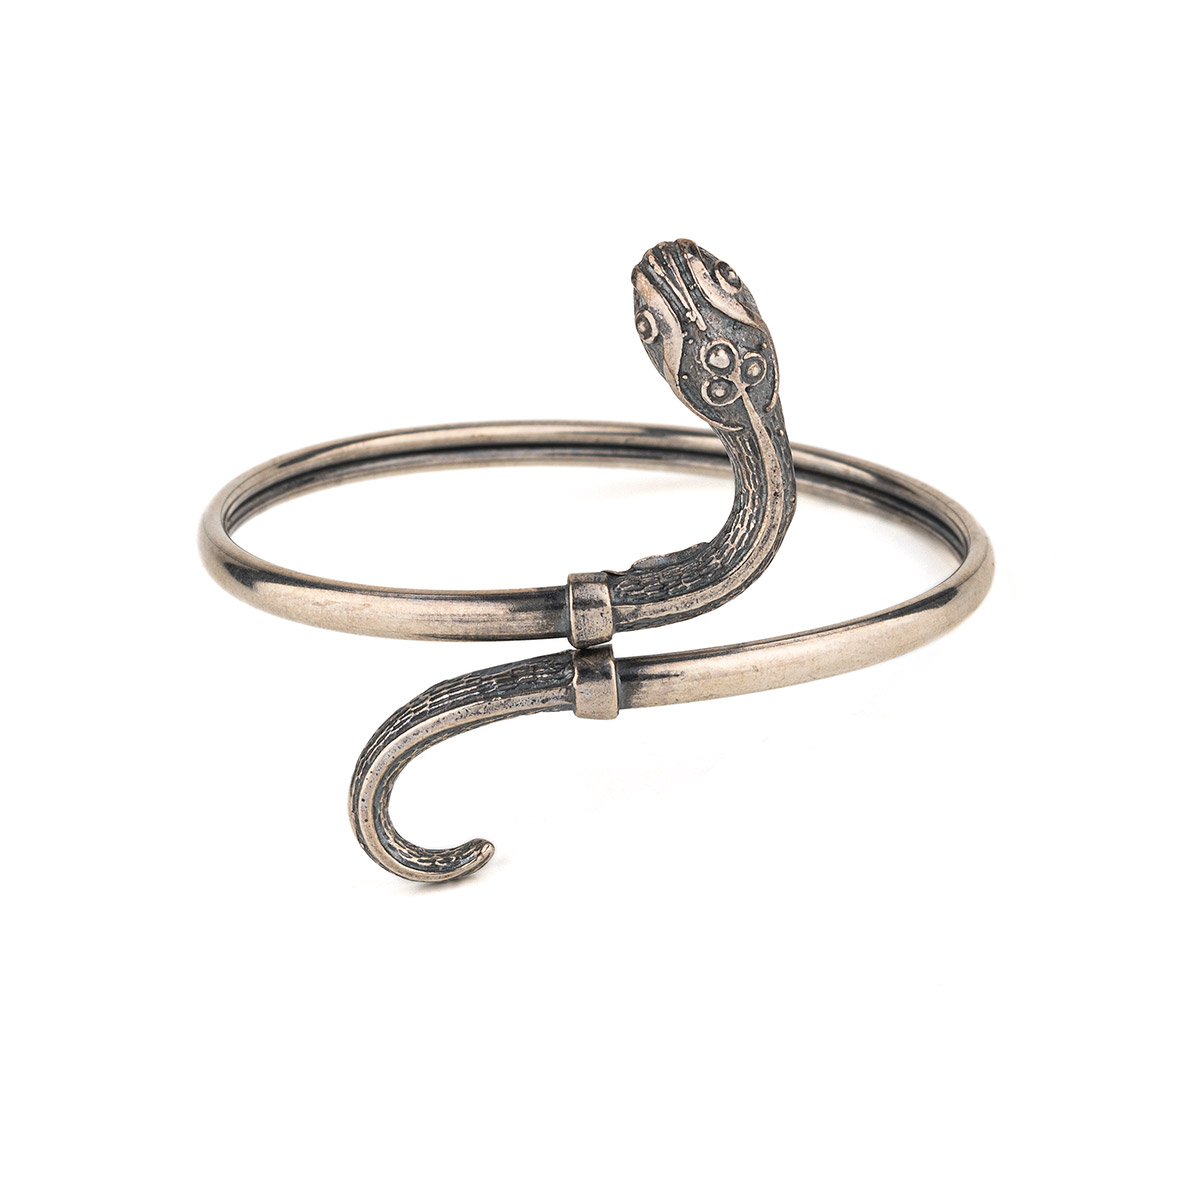 18k Gold Double Snake Infinity Snake Bangle For Men And Women Luxury  Designer Jewelry For Parties, Weddings, And Birthdays From  Premiumjewelrystore, $63.13 | DHgate.Com